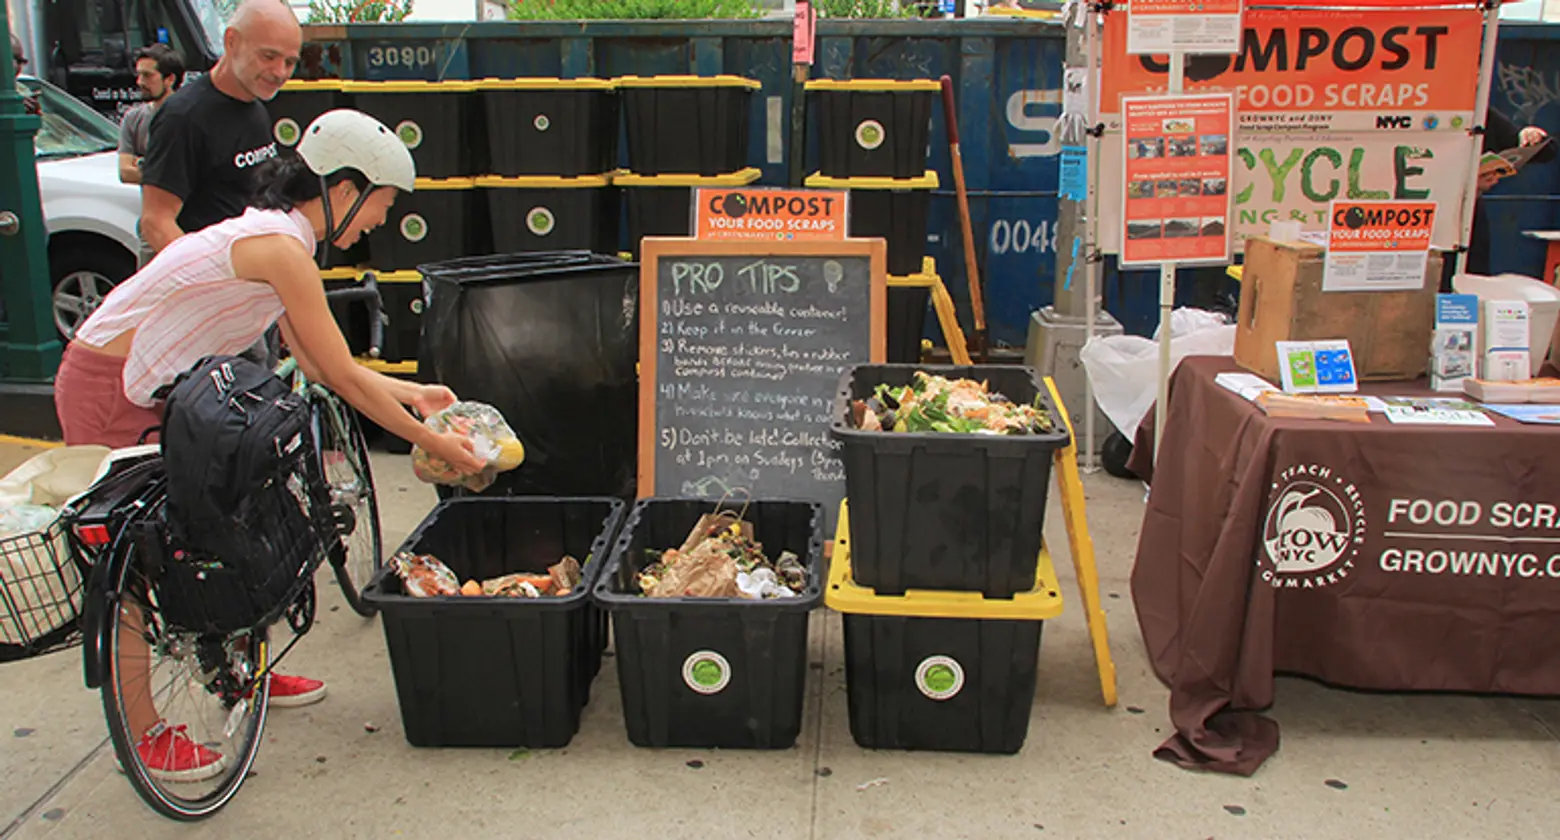 Adams proposes NYC’s first composting mandate